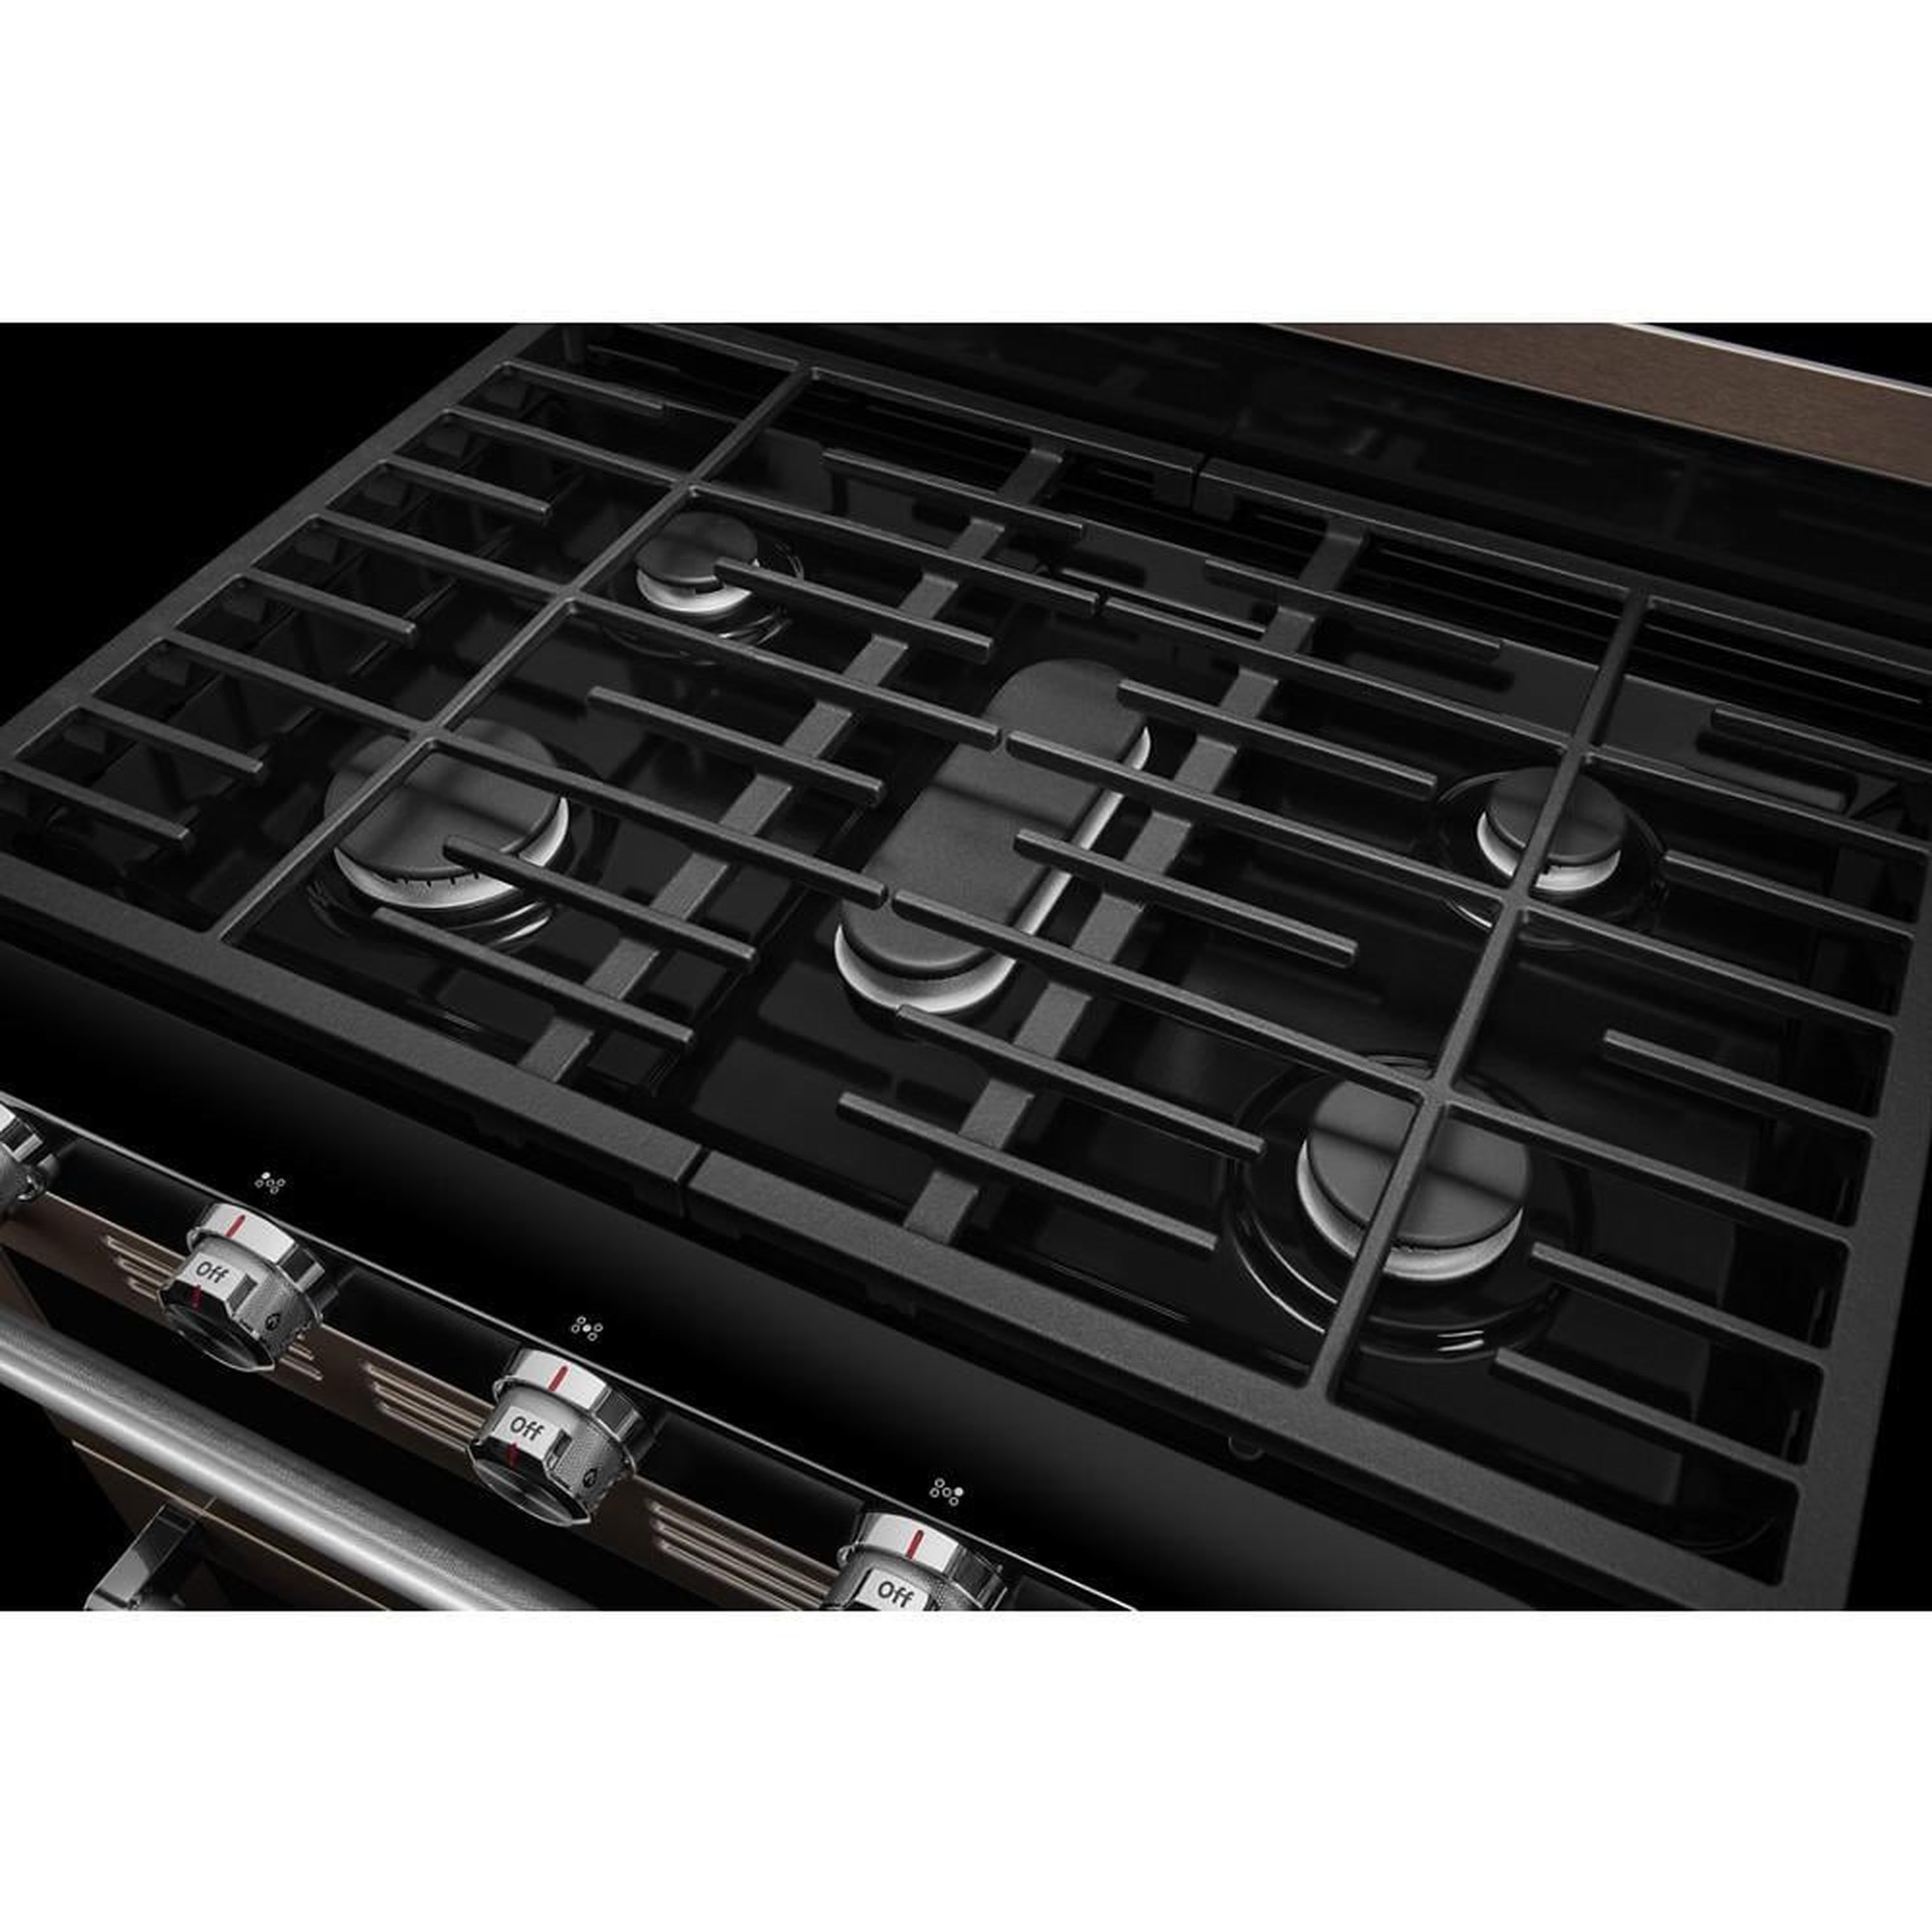 KitchenAid 30 Built-In Gas Cooktop Stainless Steel KCGS550ESS